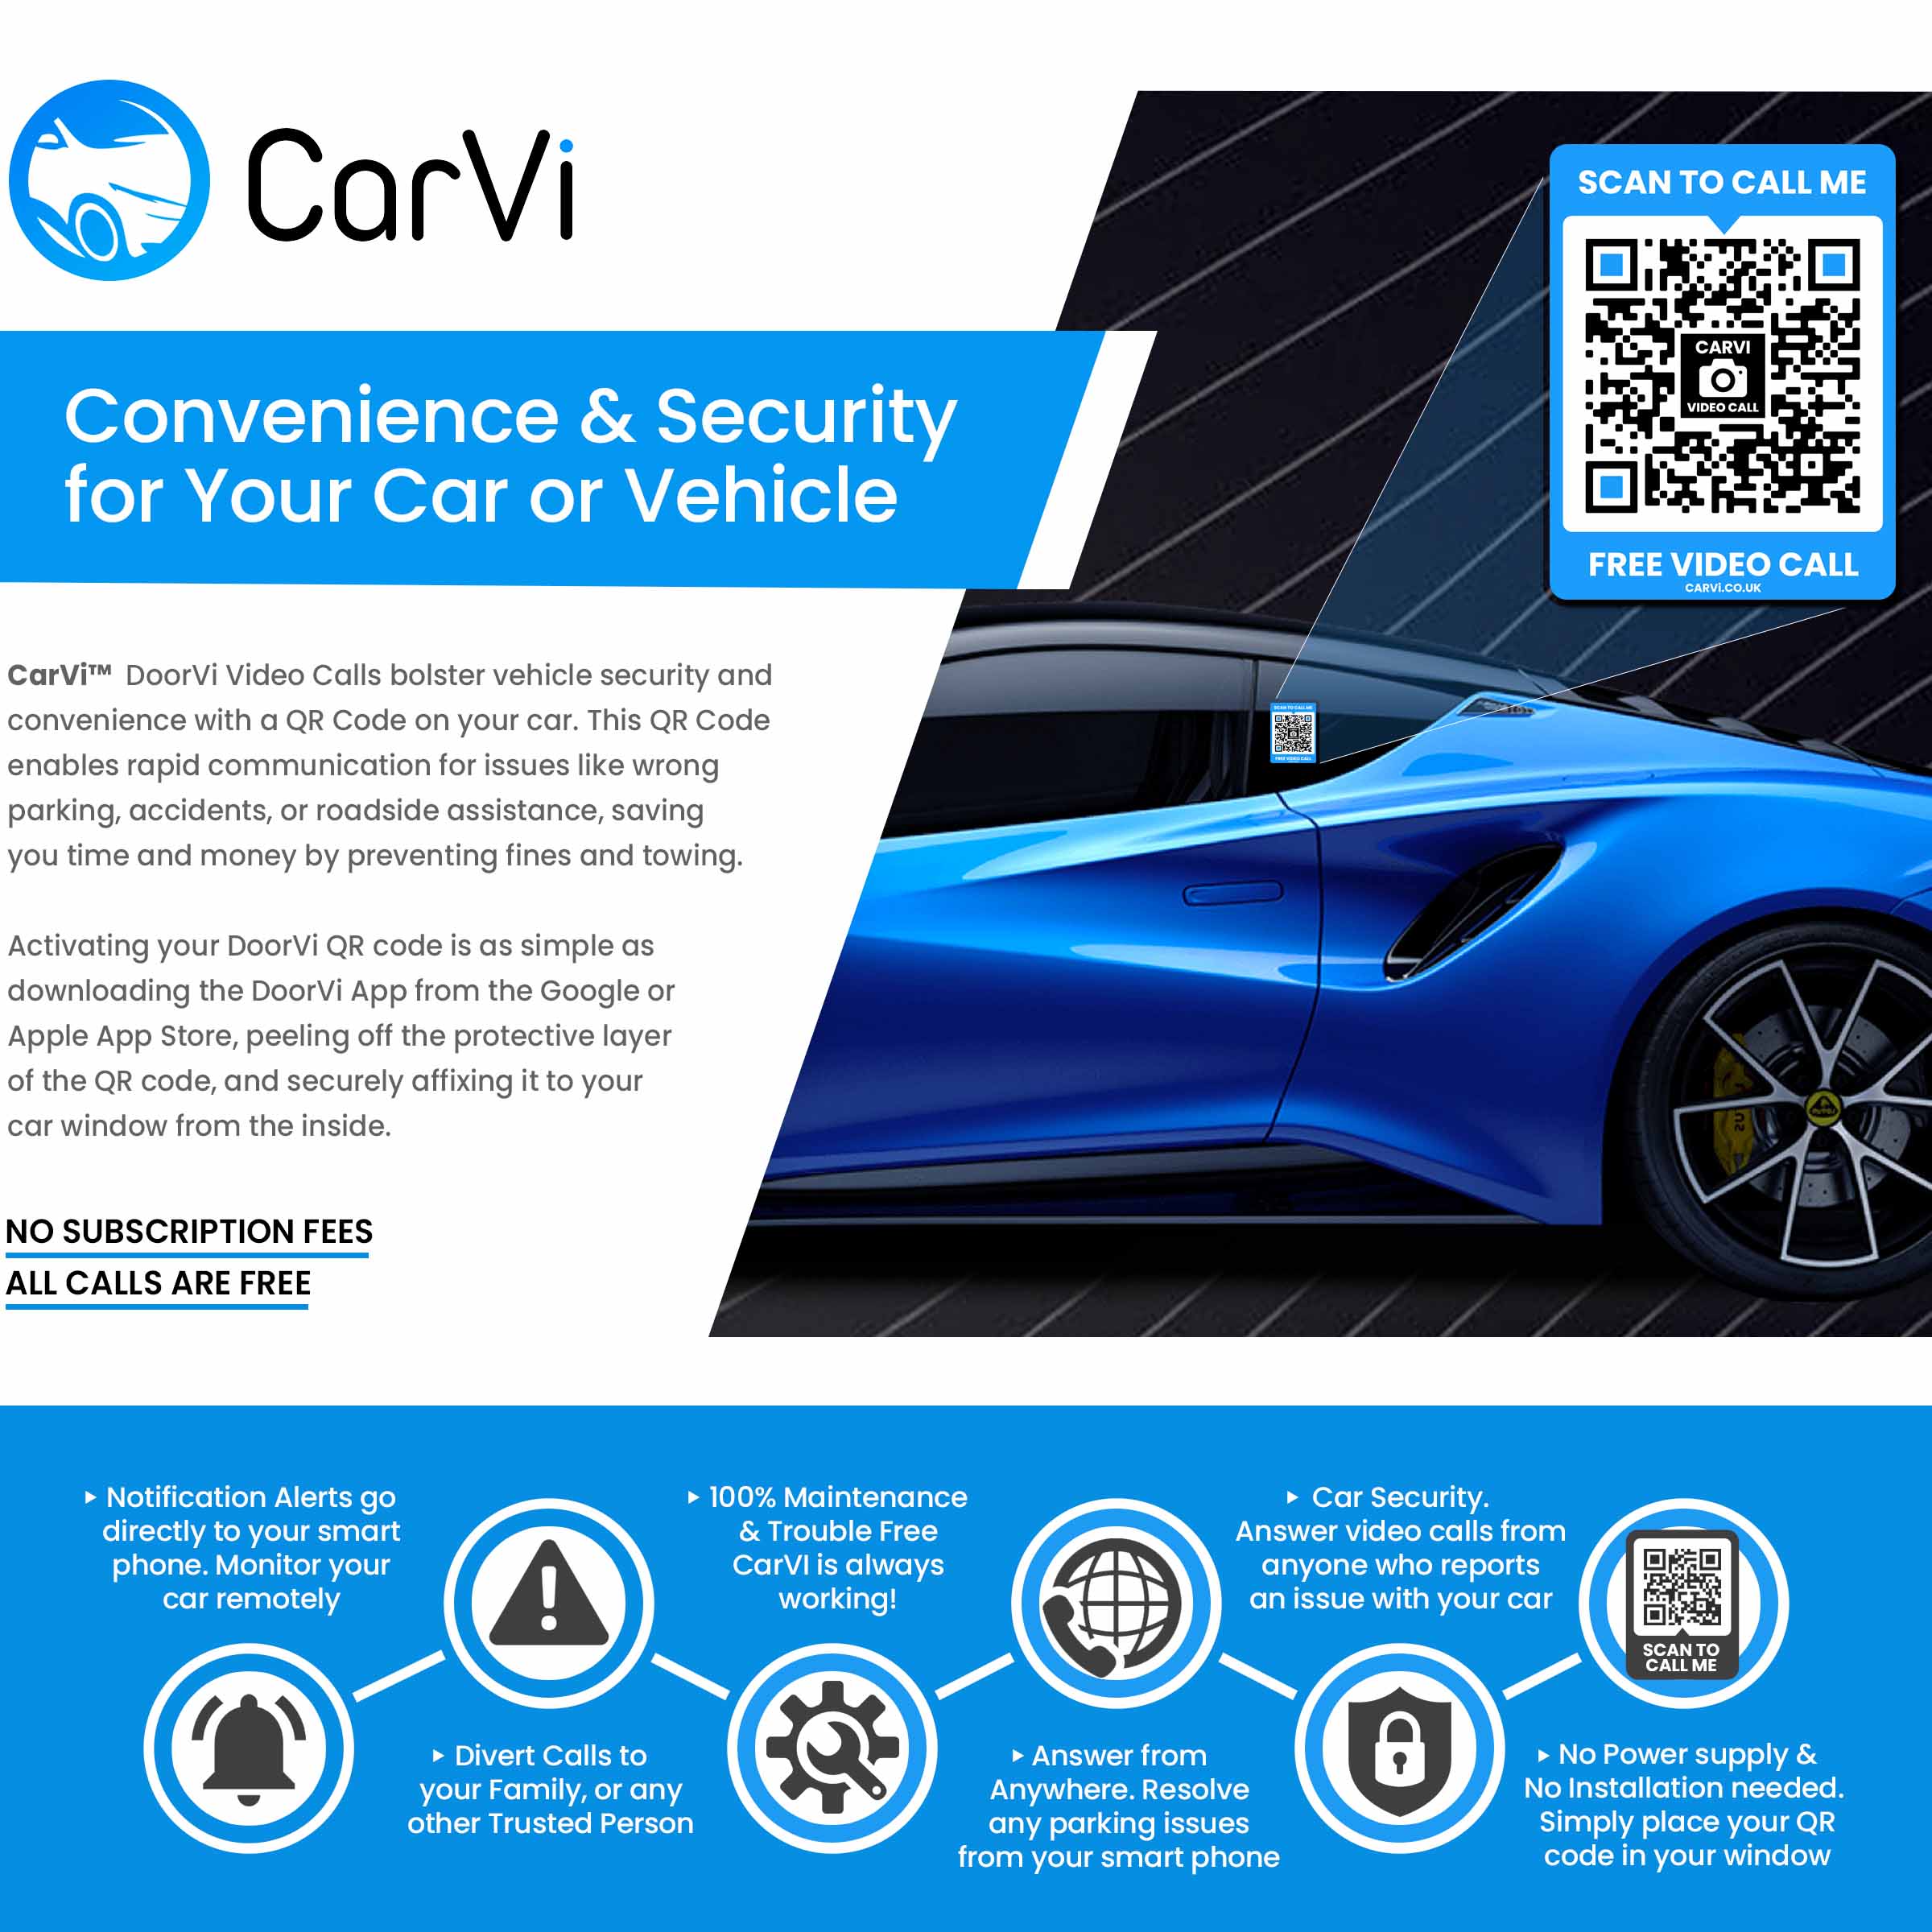 CarVi - Convenience & Security for Your Car or Vehicle